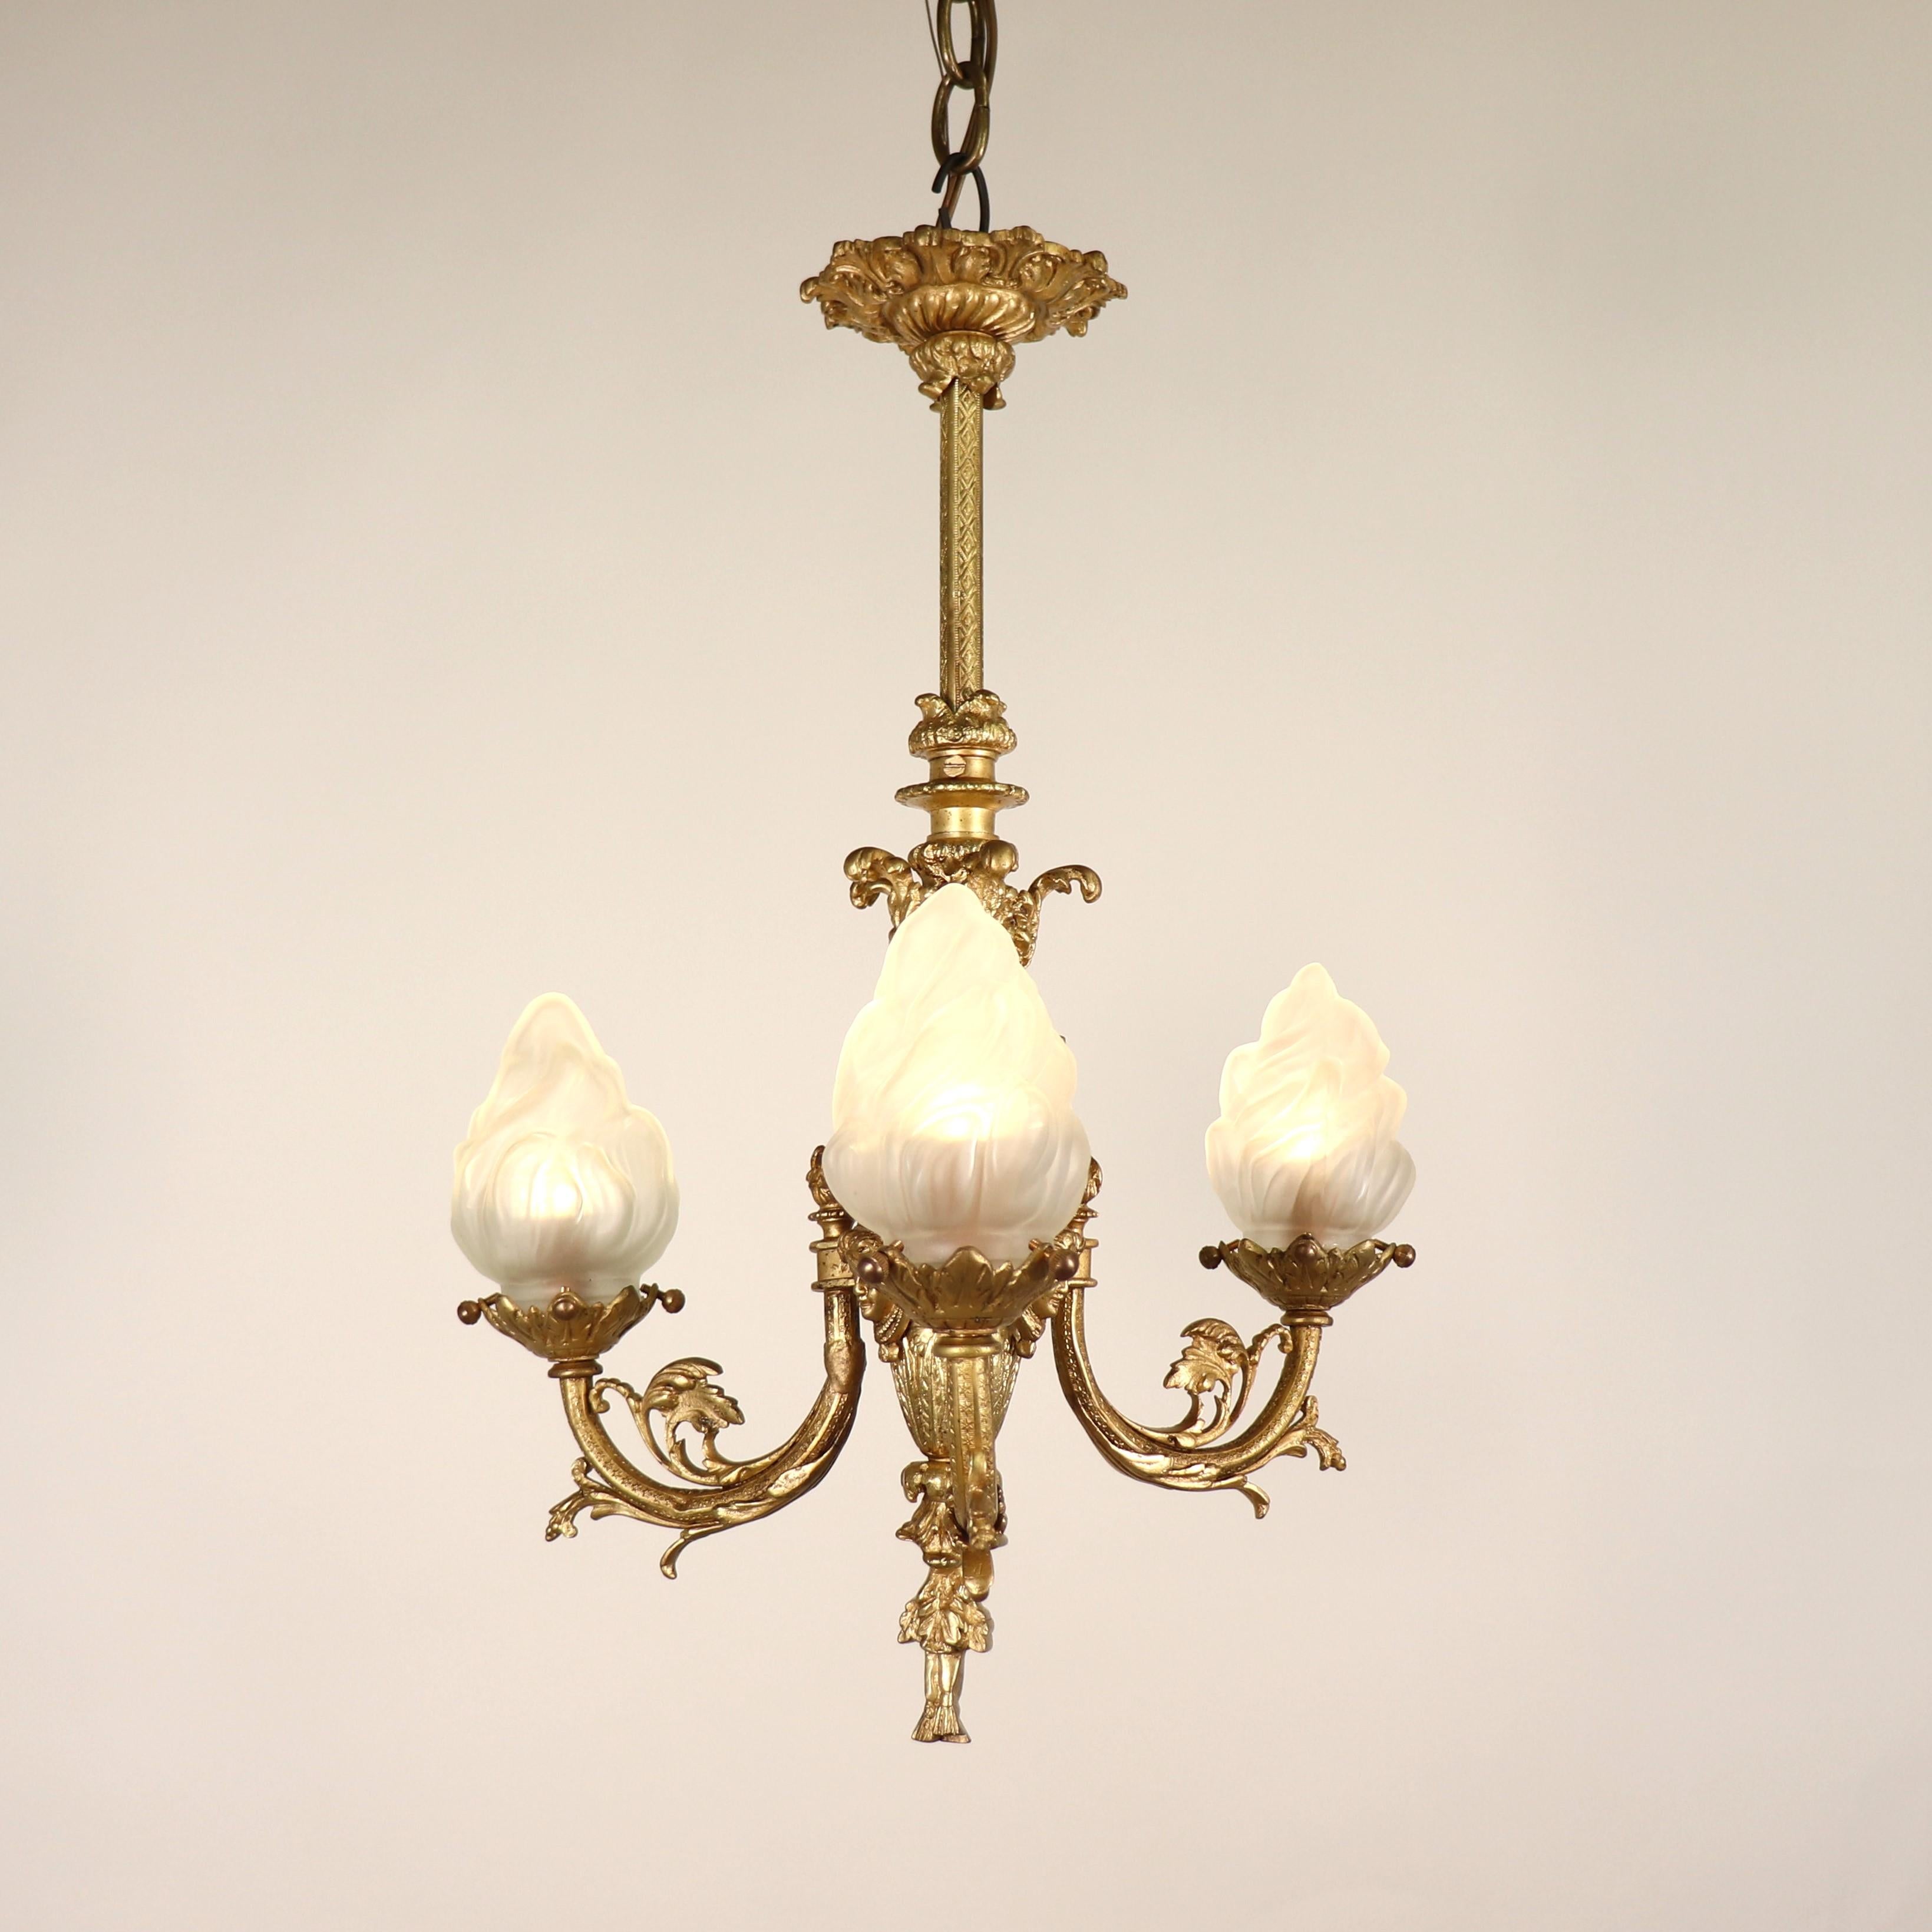 Hand-Carved 19th Century French Louis XVI Style Yellow Gold Gilt Bronze Flambeau Chandelier For Sale